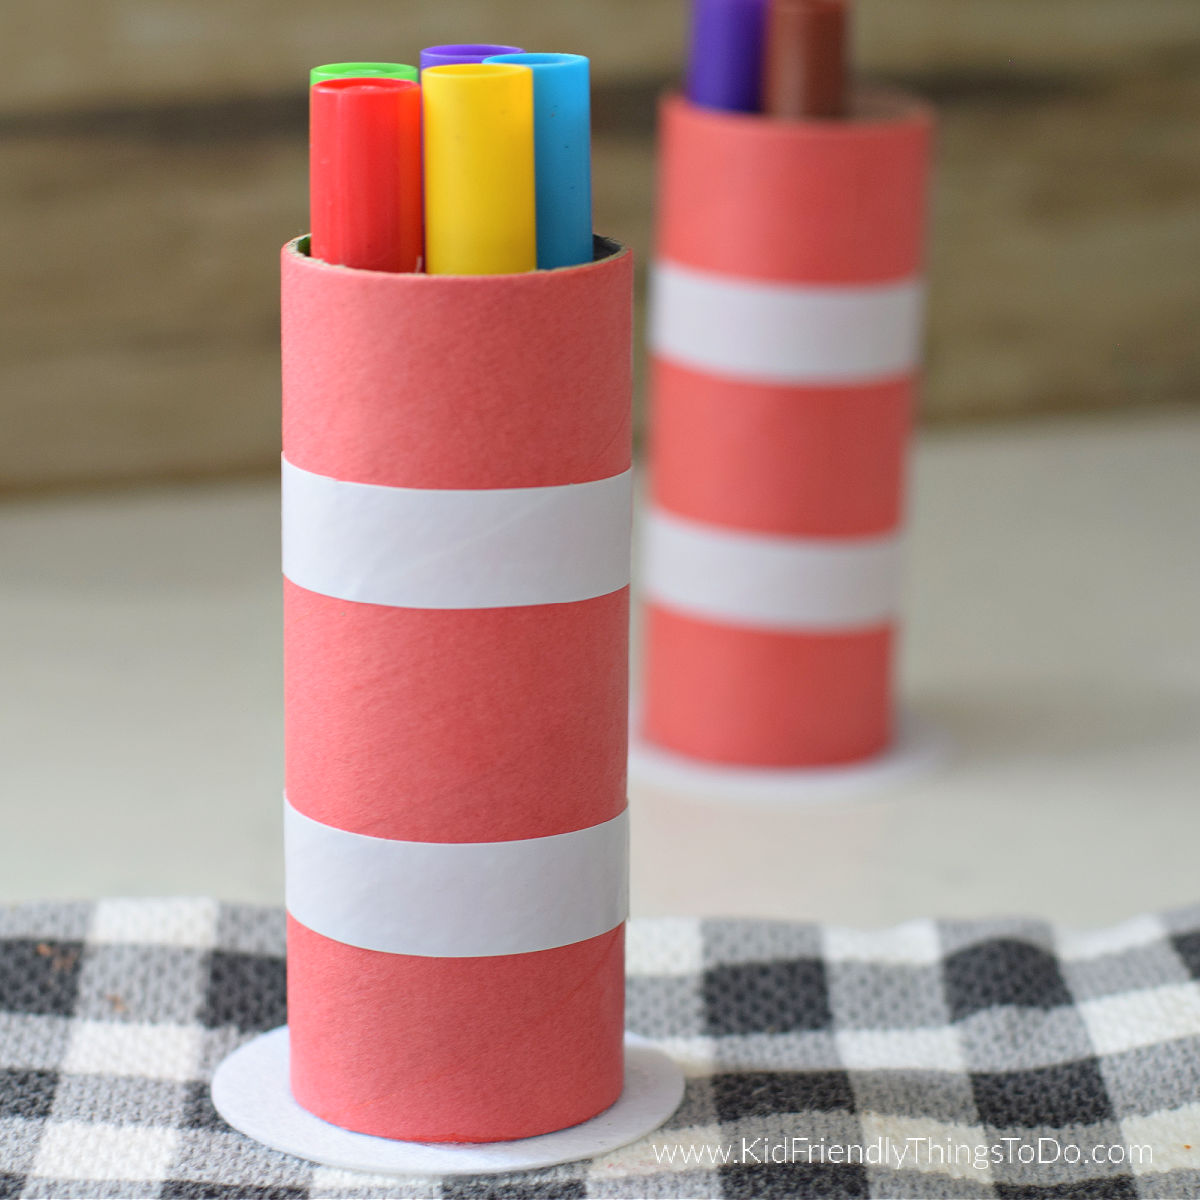 Cat in the Hat Crayon holder craft